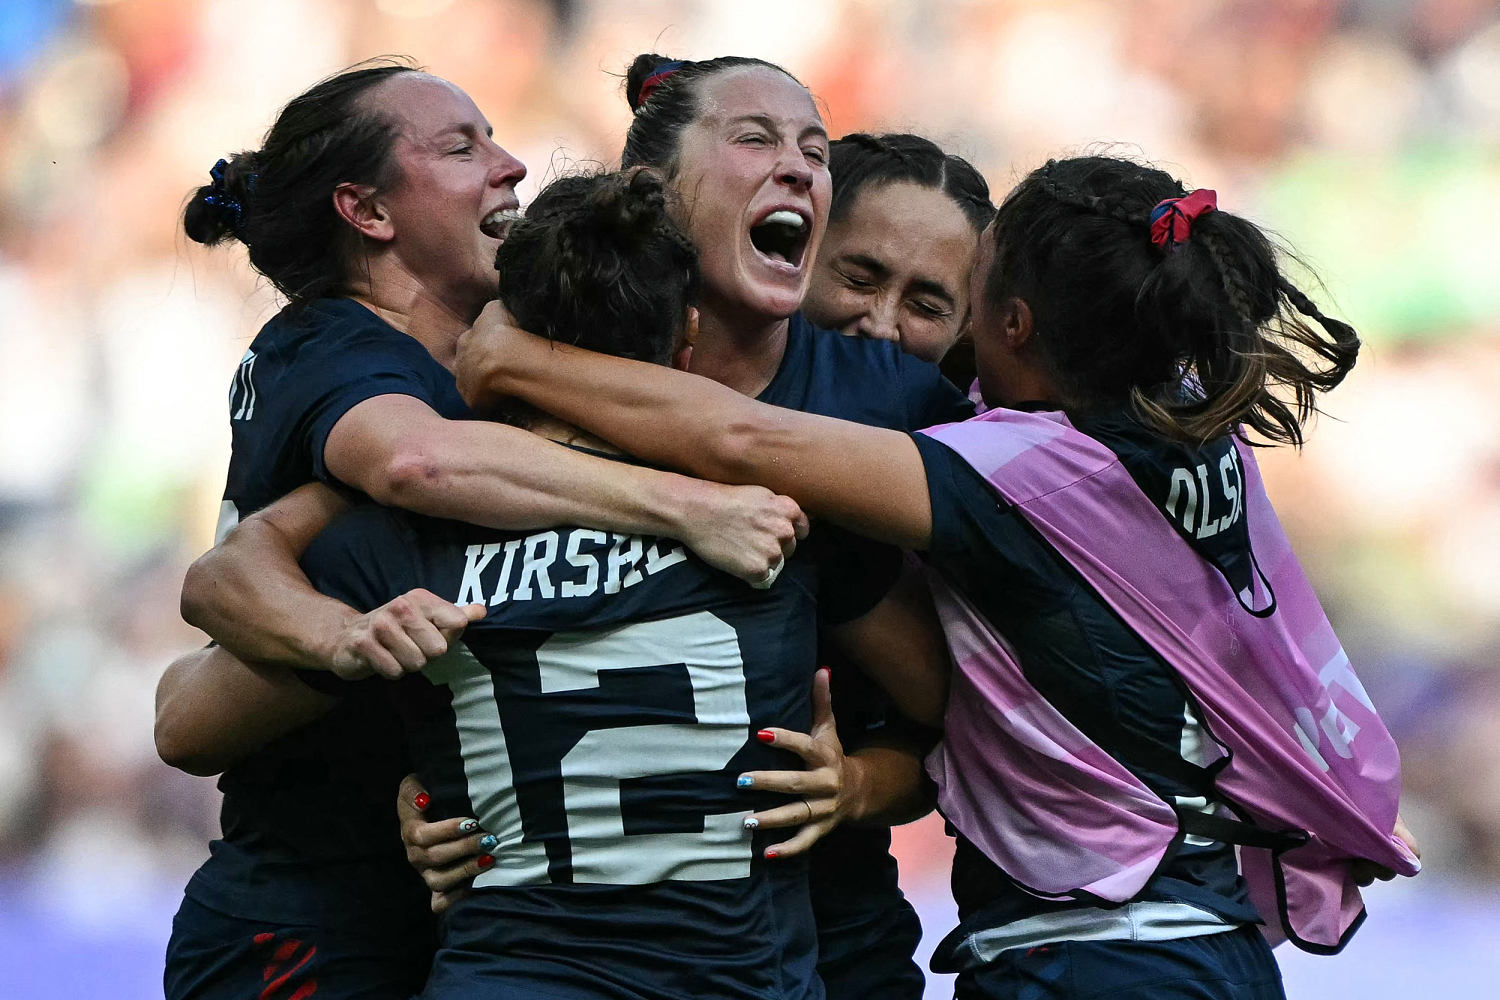 Team USA stun rugby world with 'outrageous' medal win, planting flag for sport in America 